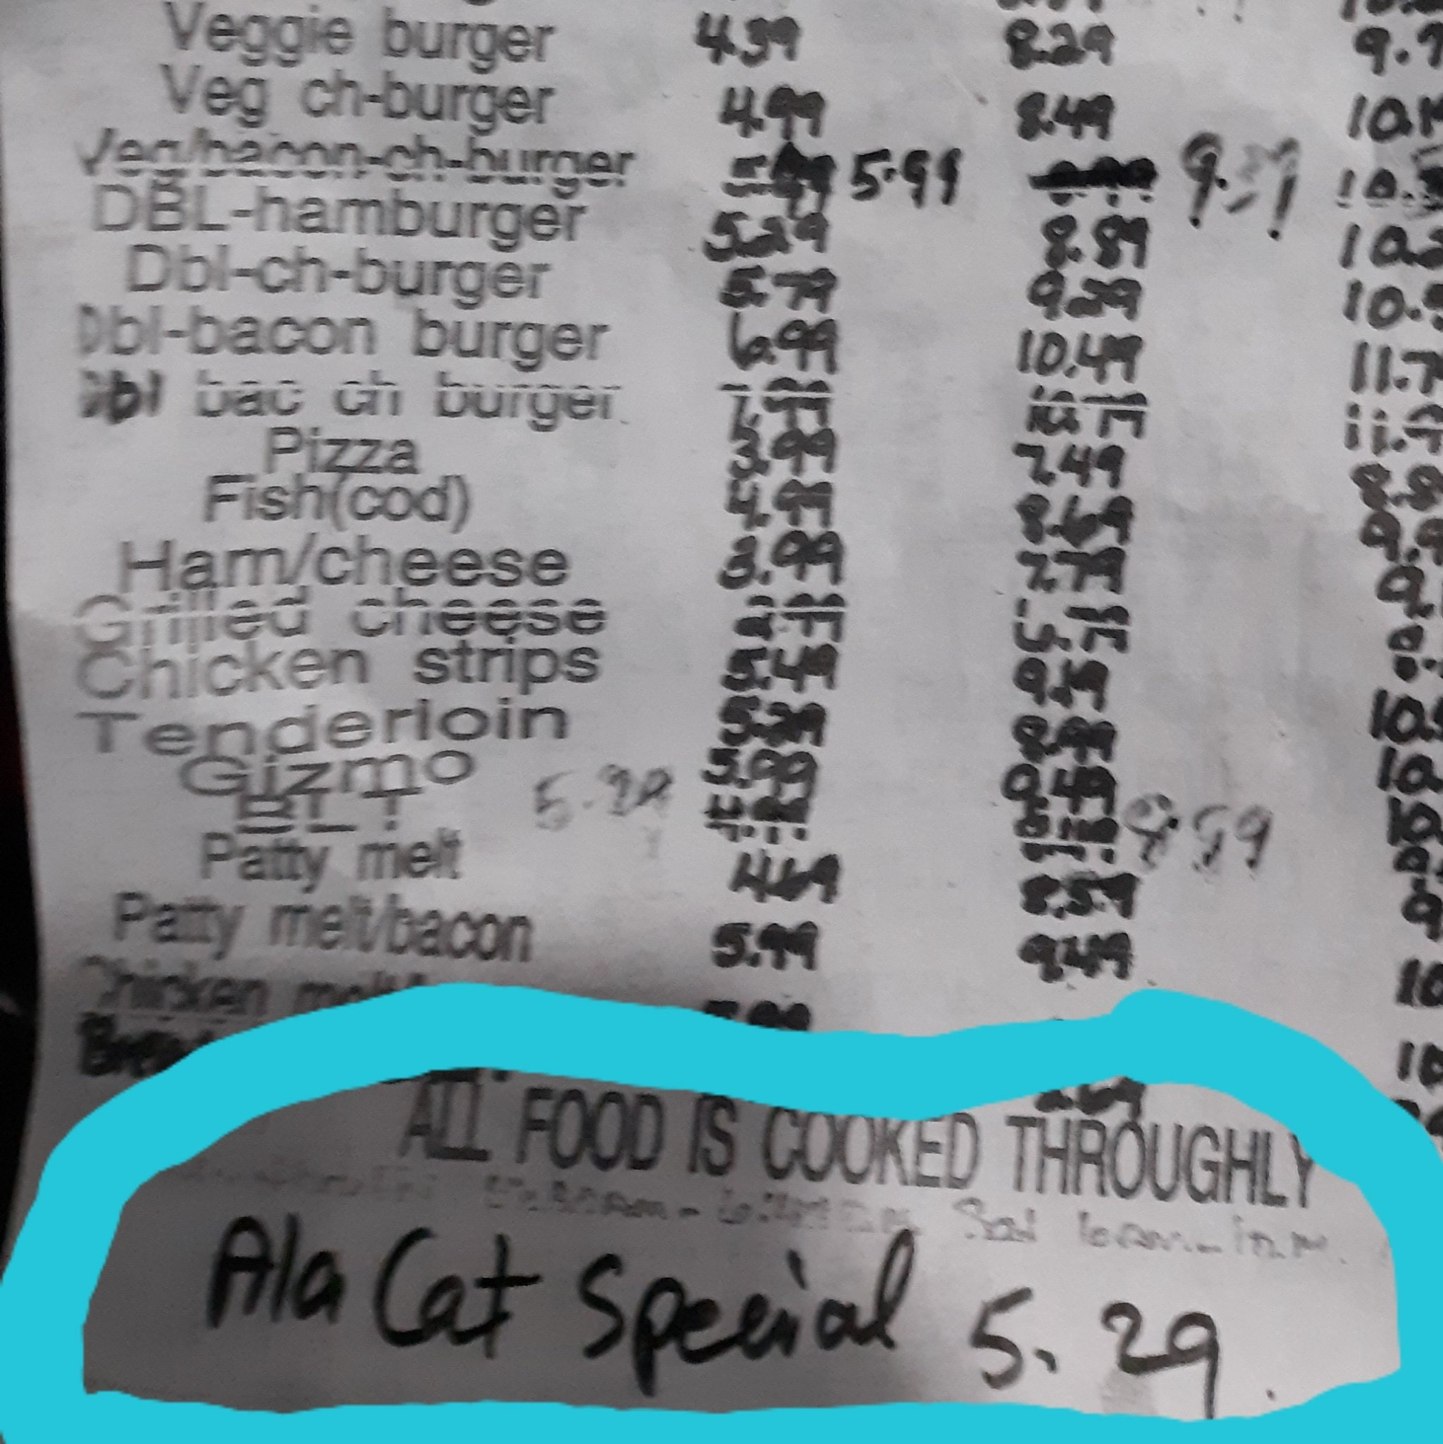 Ah yes the infamous Ala Cat Special - meme